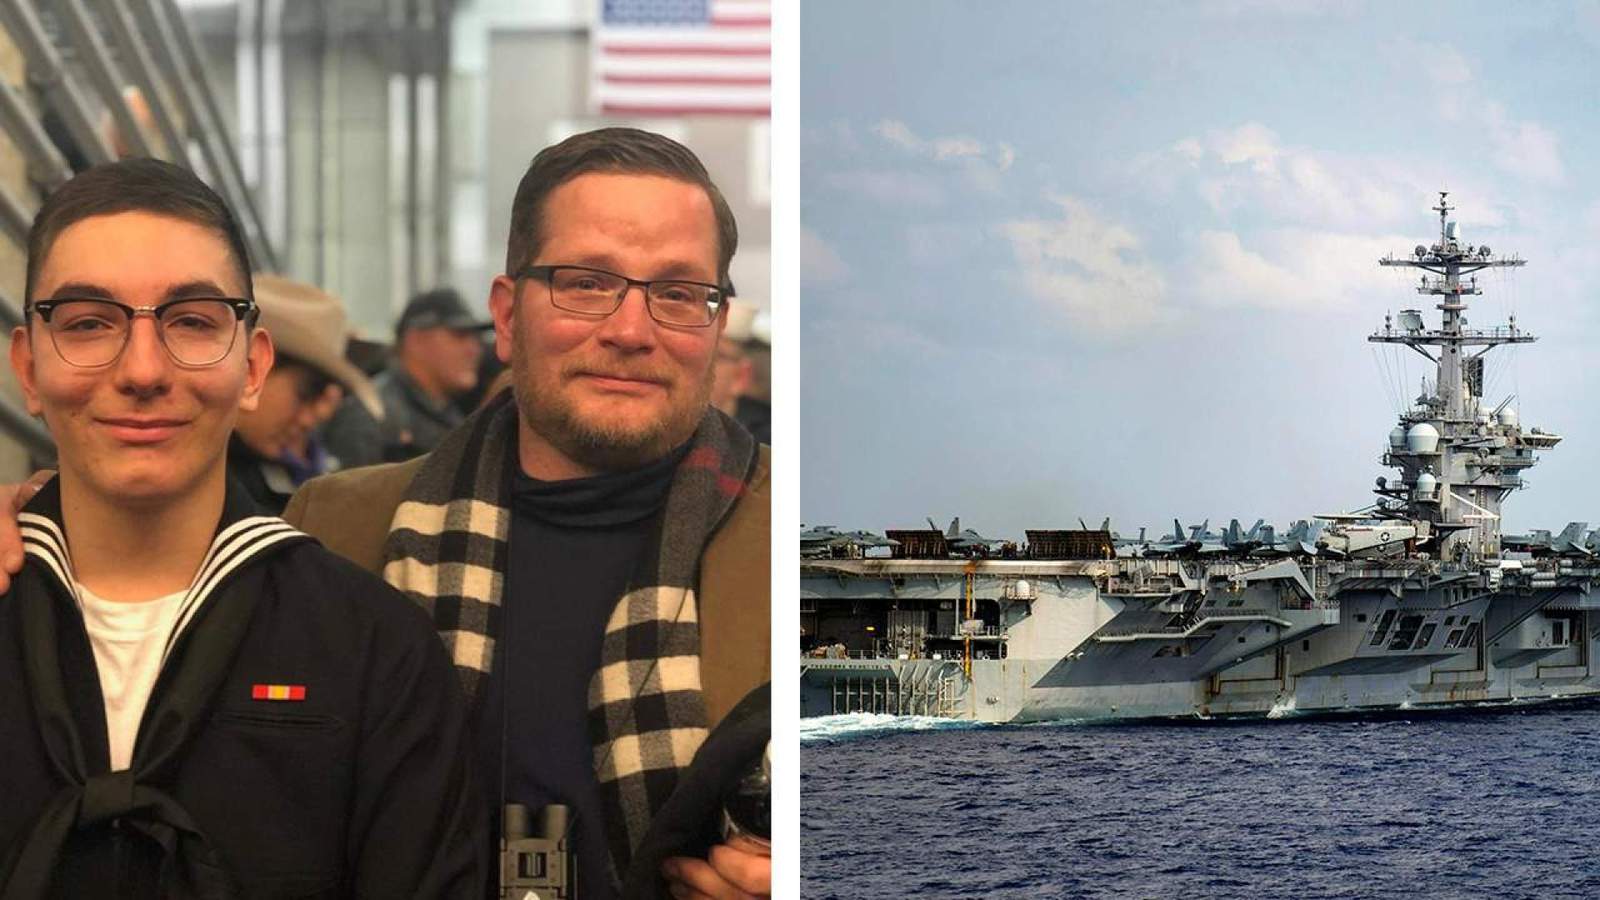 ‘We are holding out hope for a miracle’: Family says after SA sailor reported missing off California coast